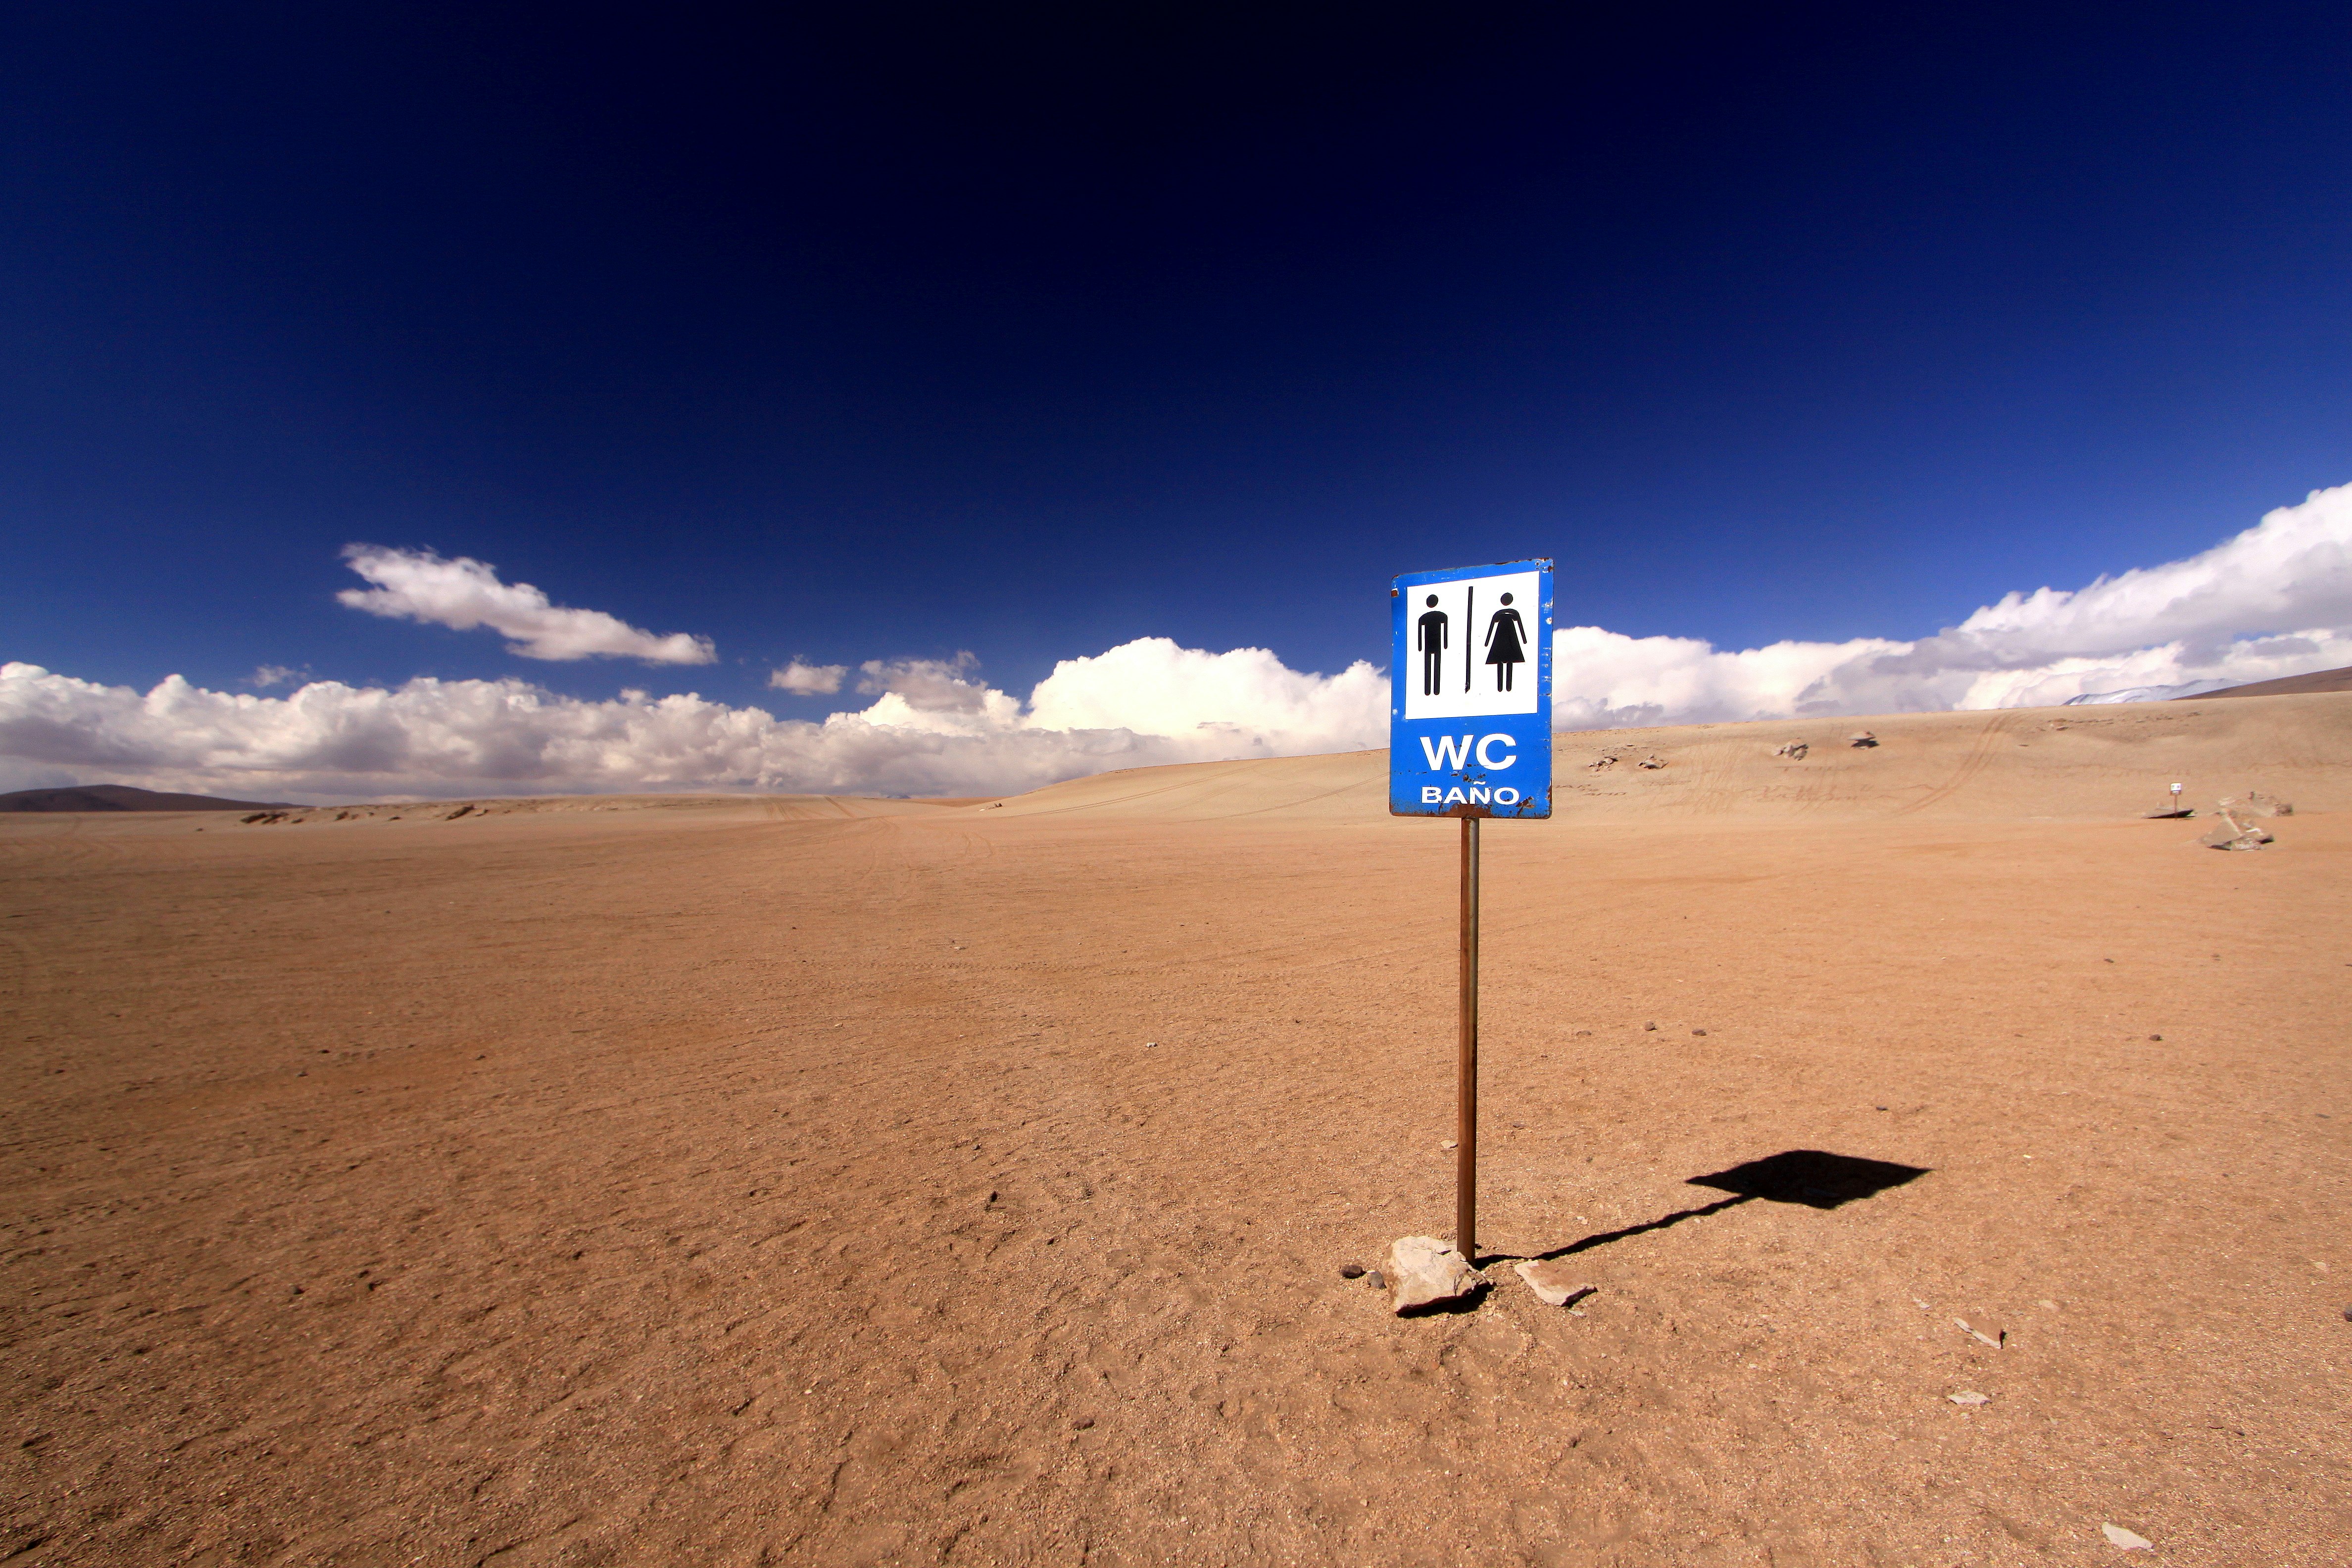 A sign reading "WC" in the middle of a red desert